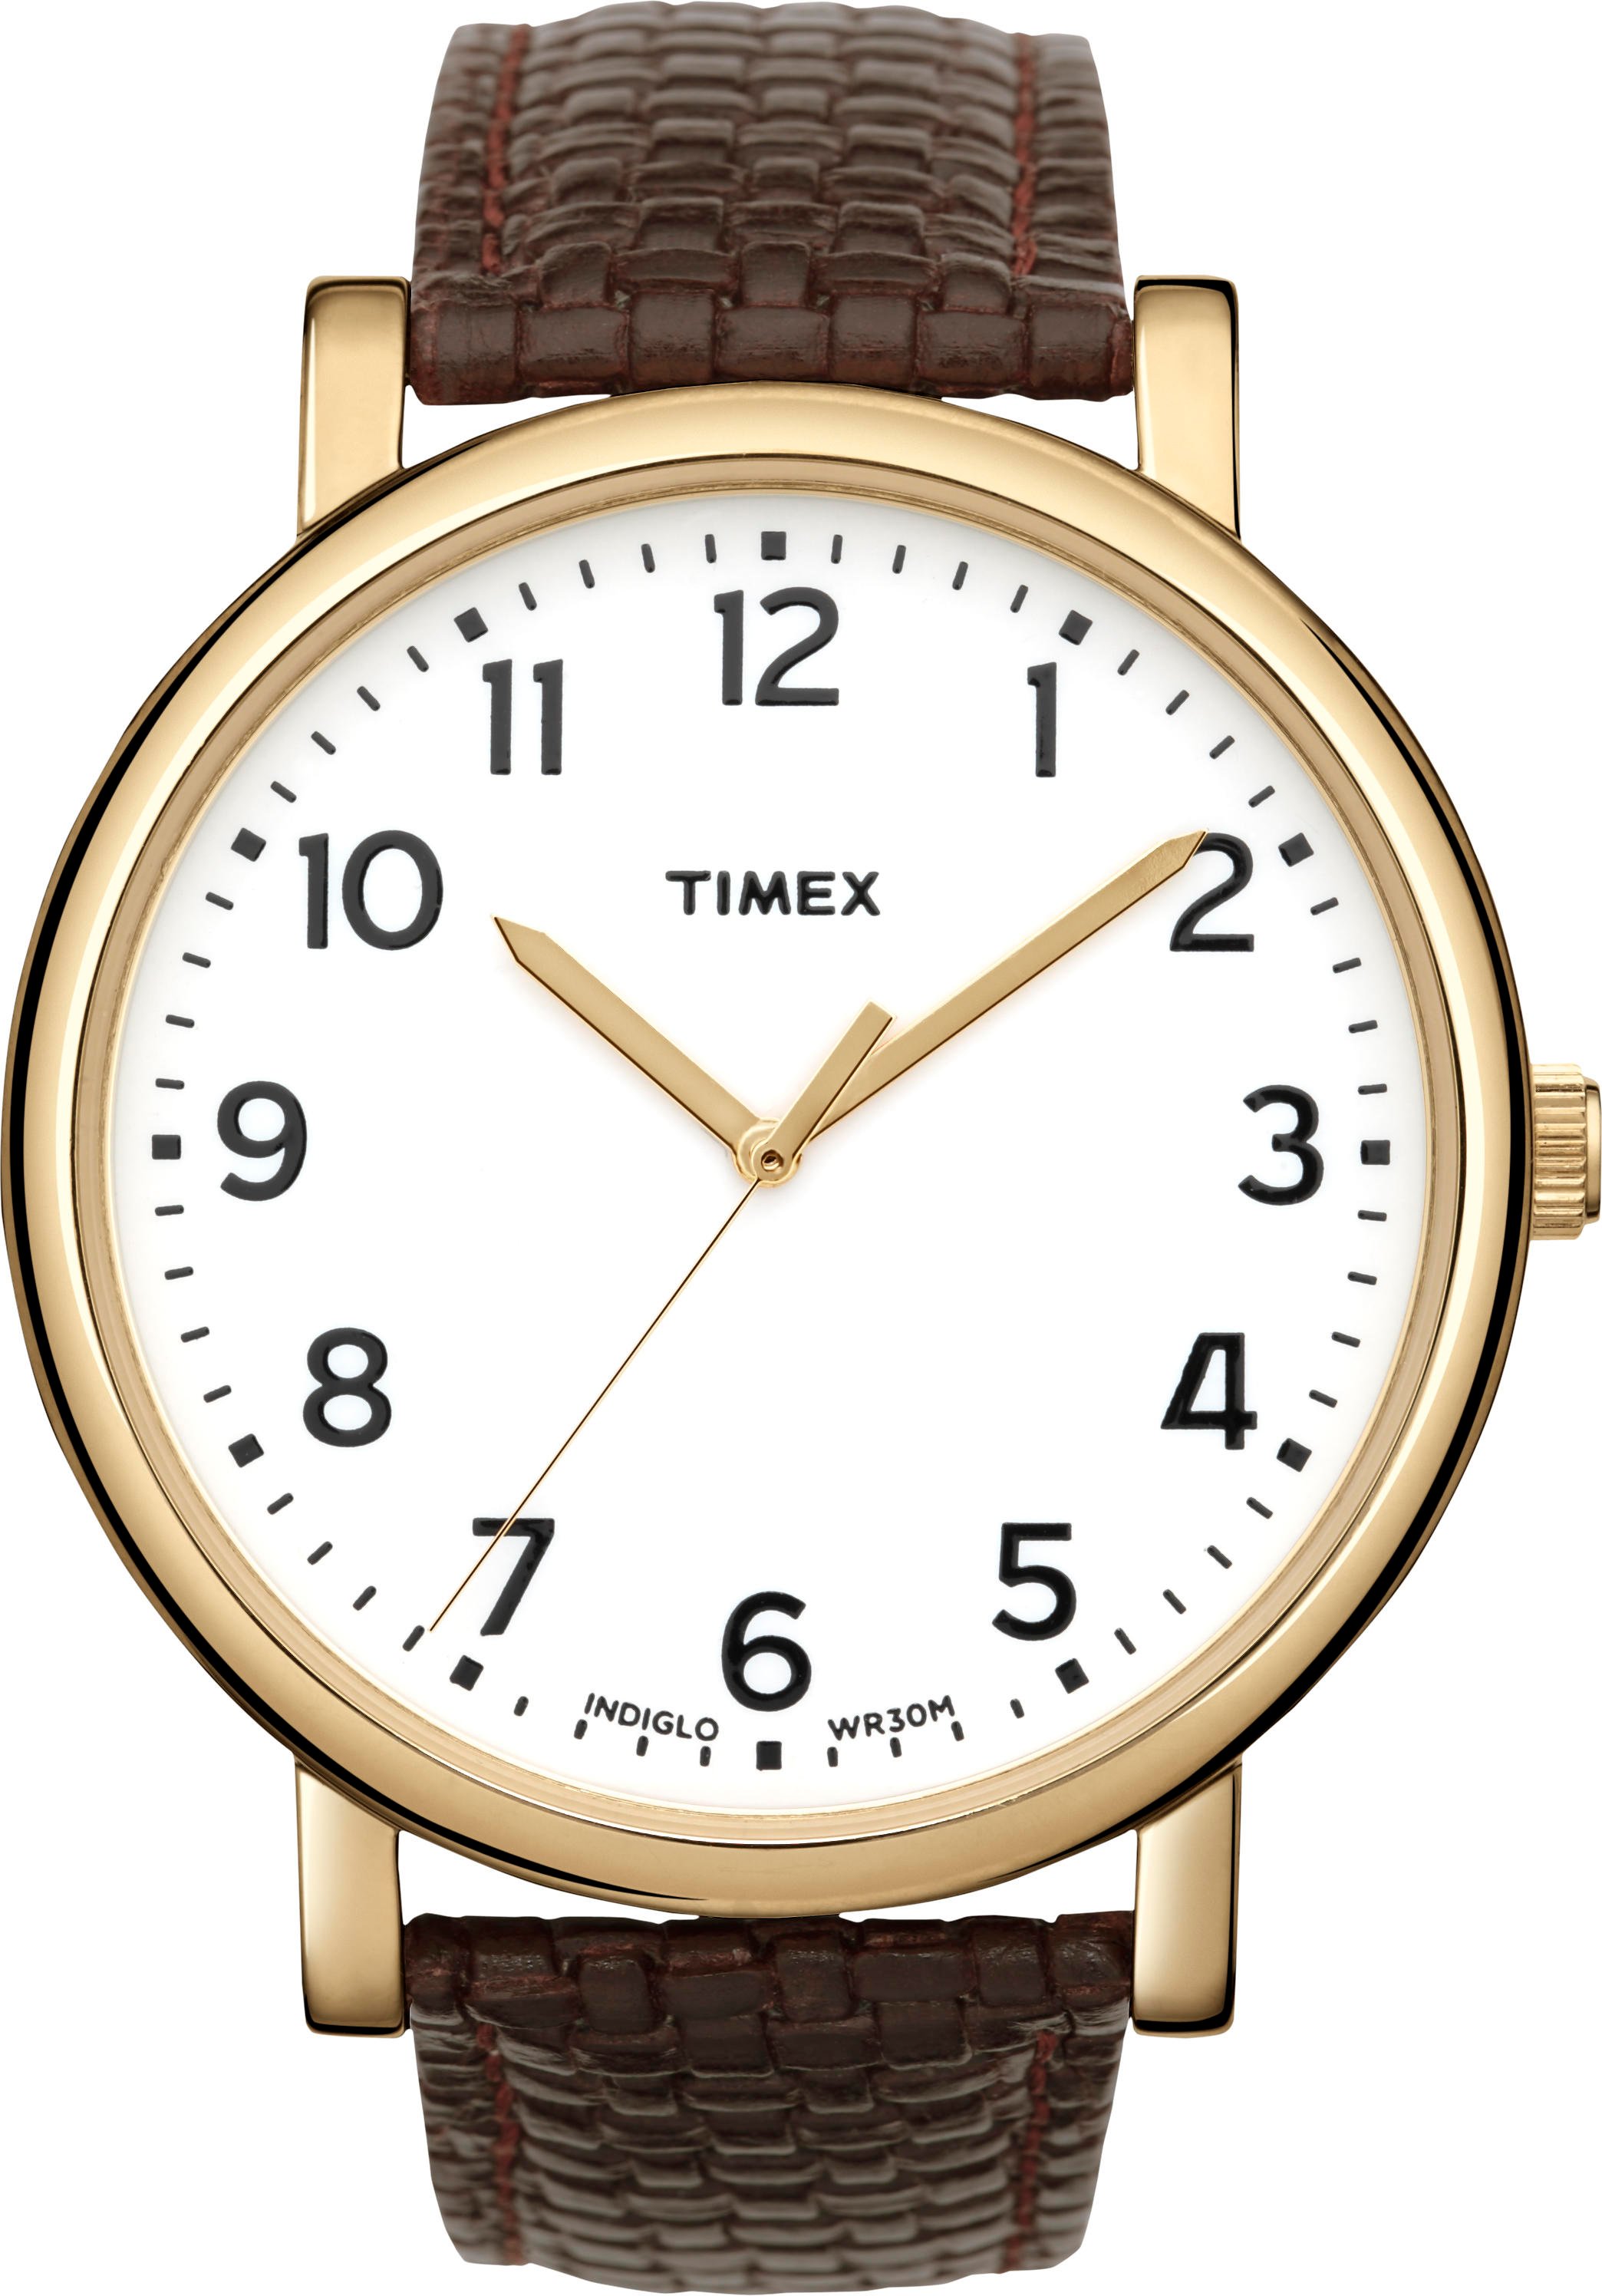 Father's Day gift idea: Timex timepiece